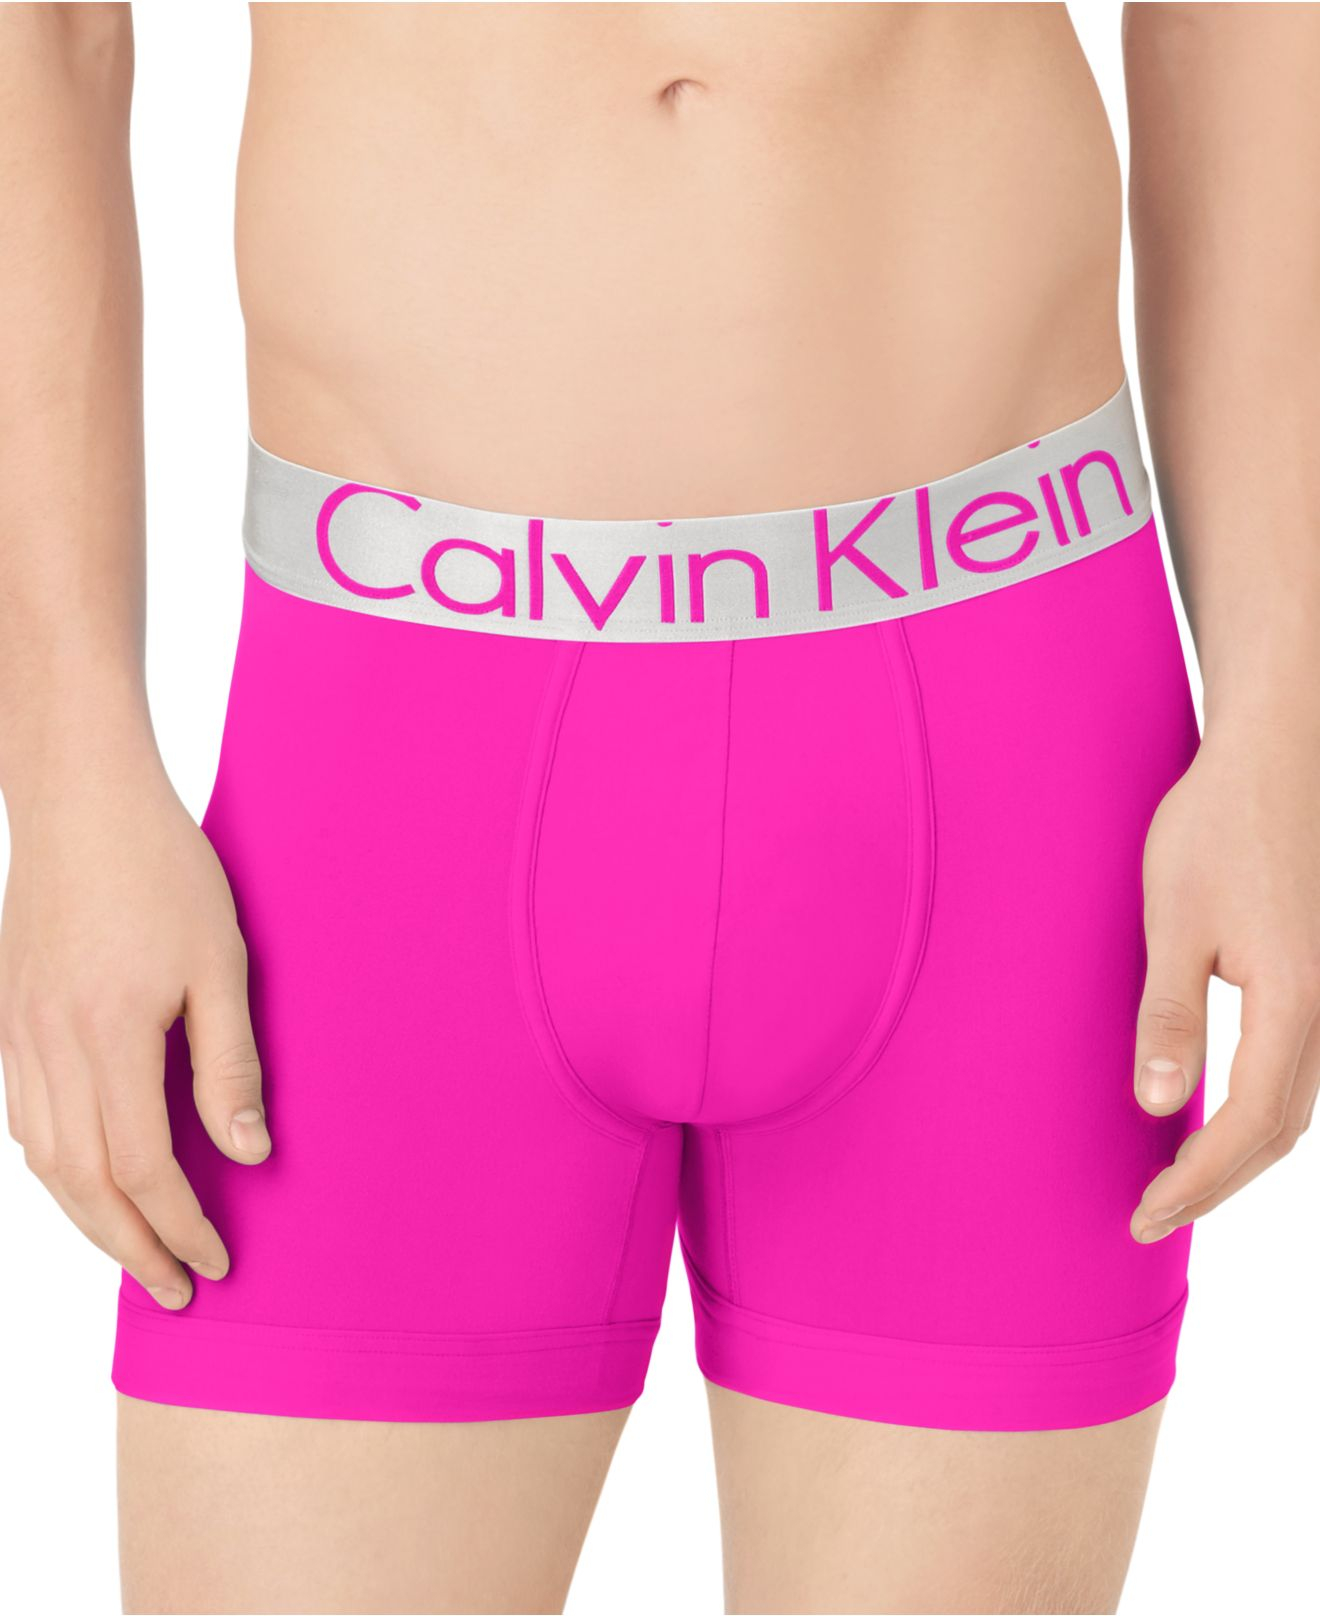 Calvin Klein Synthetic Steel Micro Boxer Brief U2719 in Pink for Men - Lyst